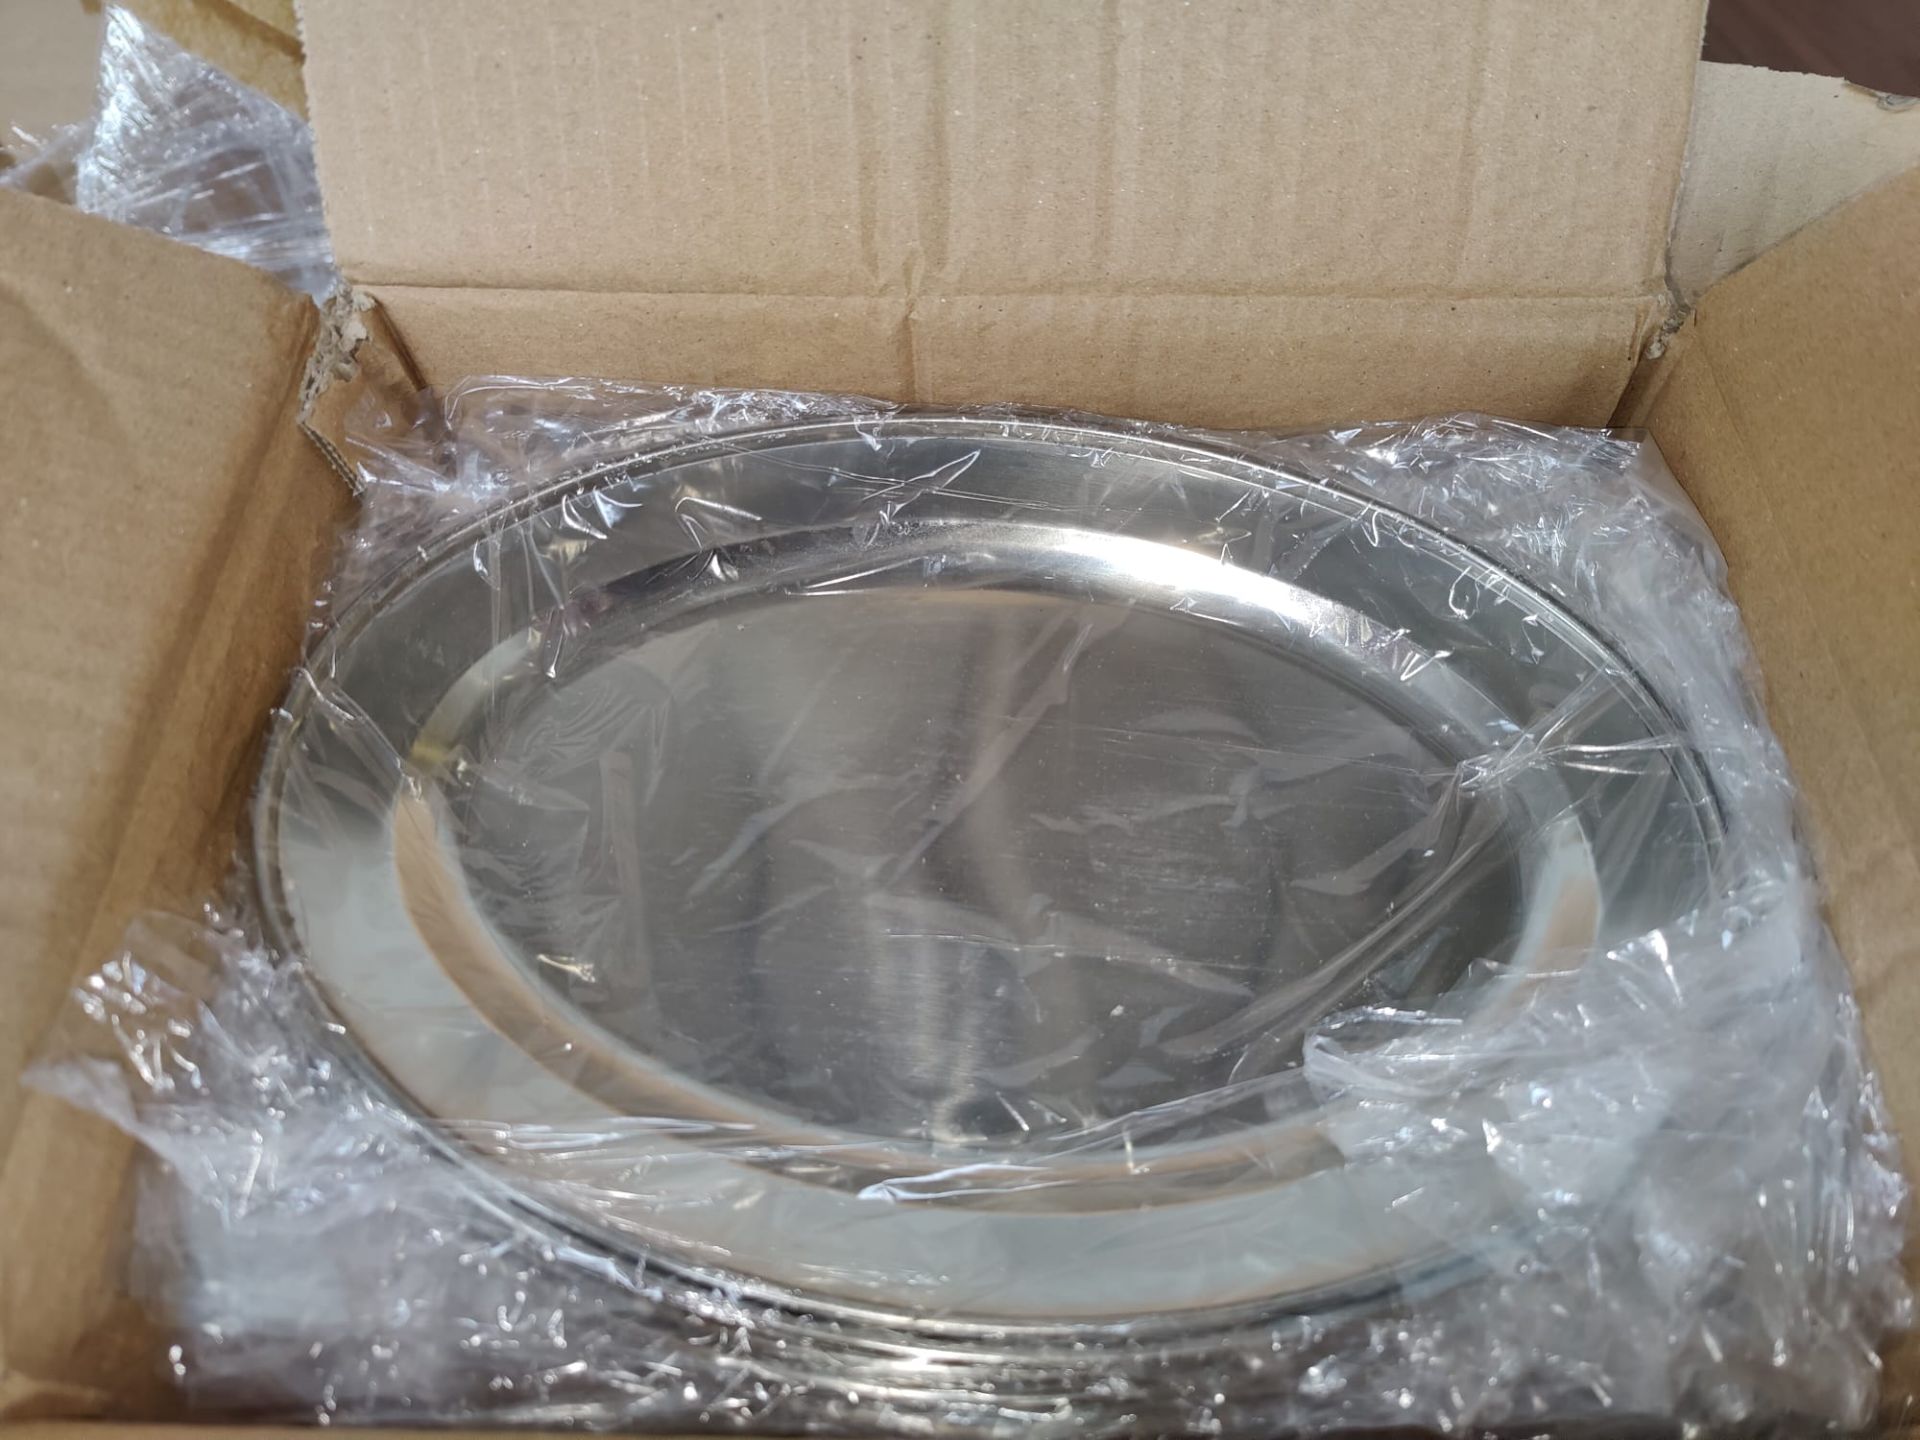 18 x Stainless Steel Small Oval Service Trays - Size: 255mm x 180mm - Brand New Boxed Stock RRP £90 - Image 4 of 7